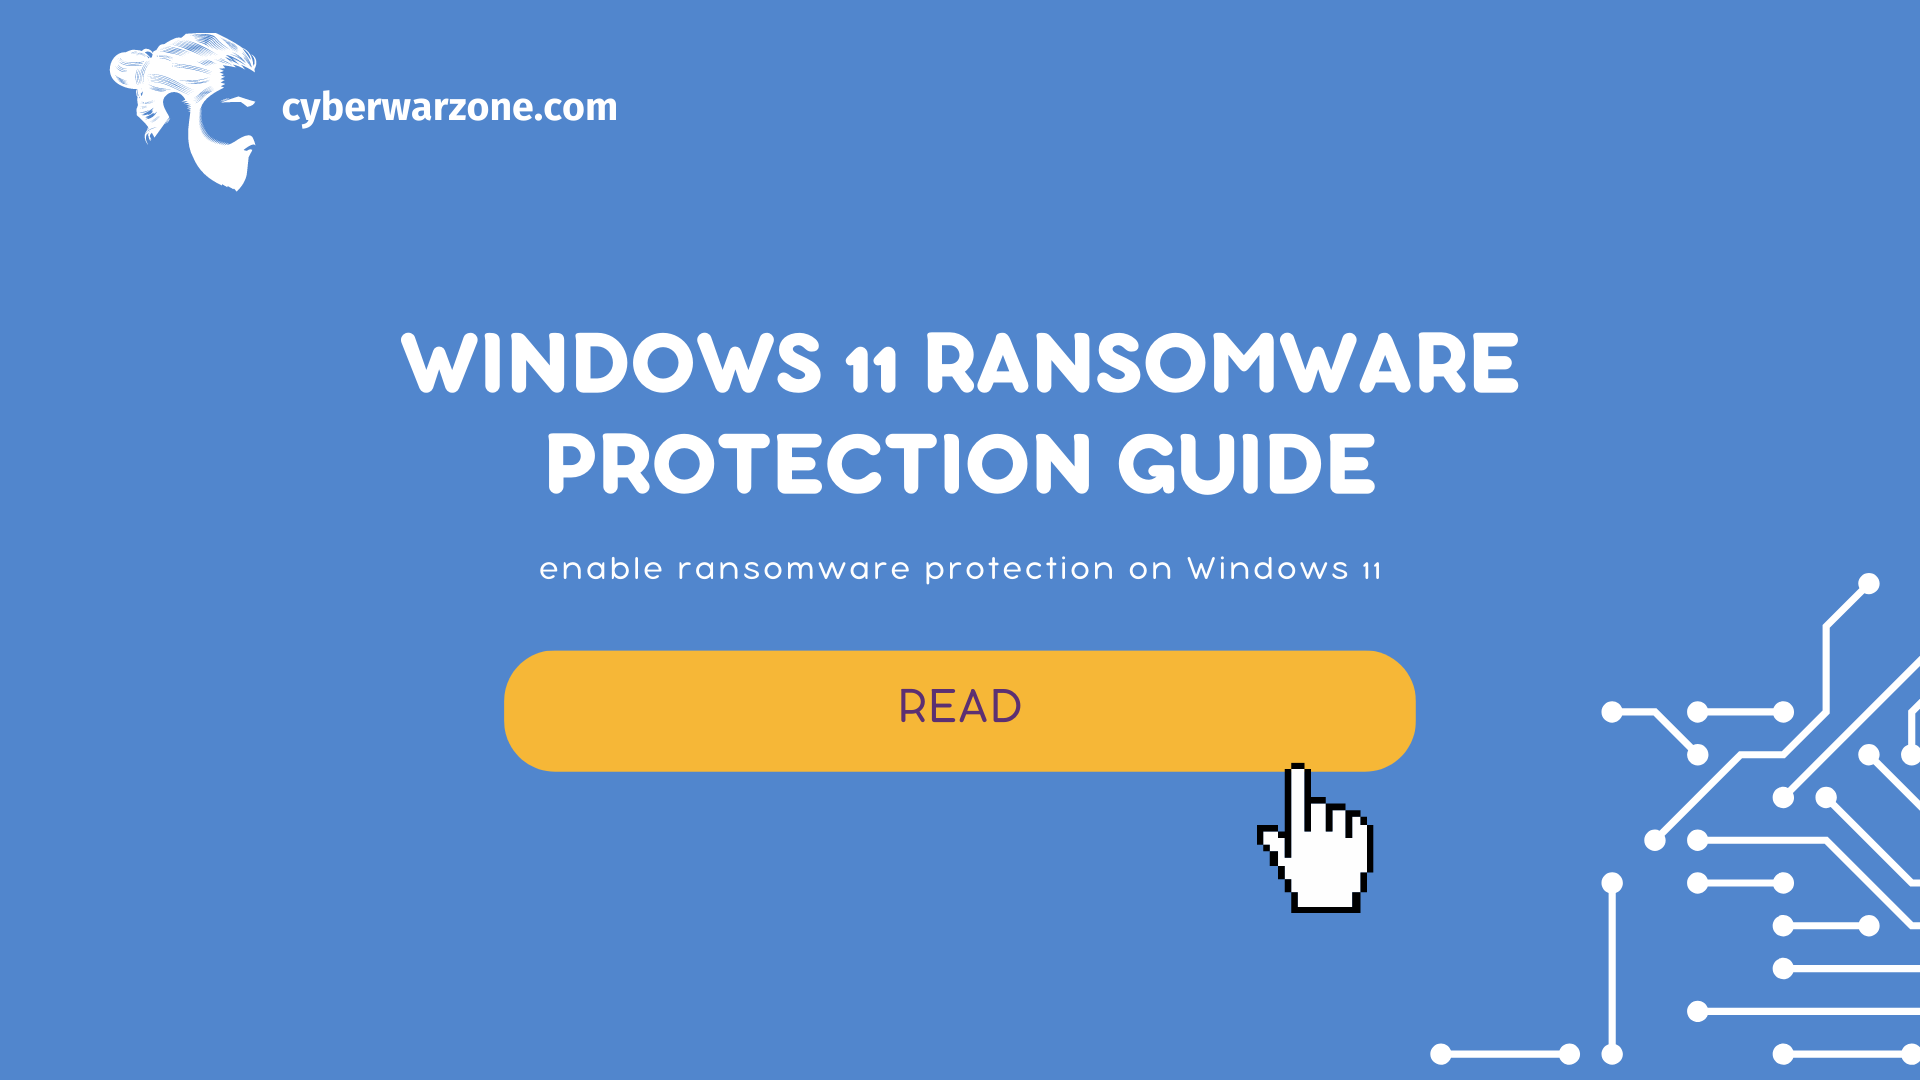 Windows 11 Ransomware Protection Guide